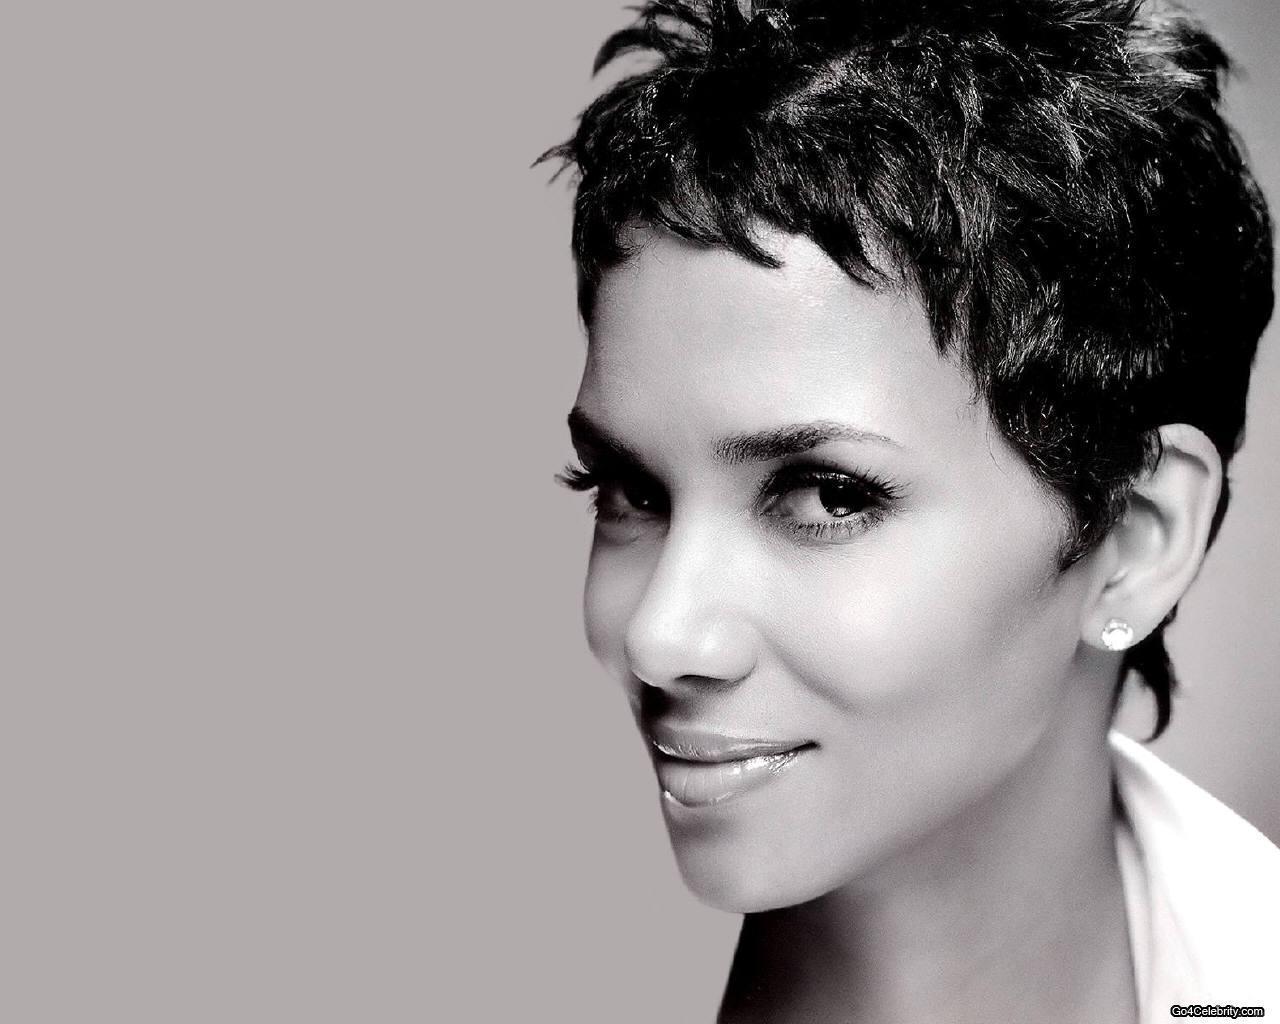 Latest Halle Berry HD Wallpaper Download. New HD Wallpaper Download